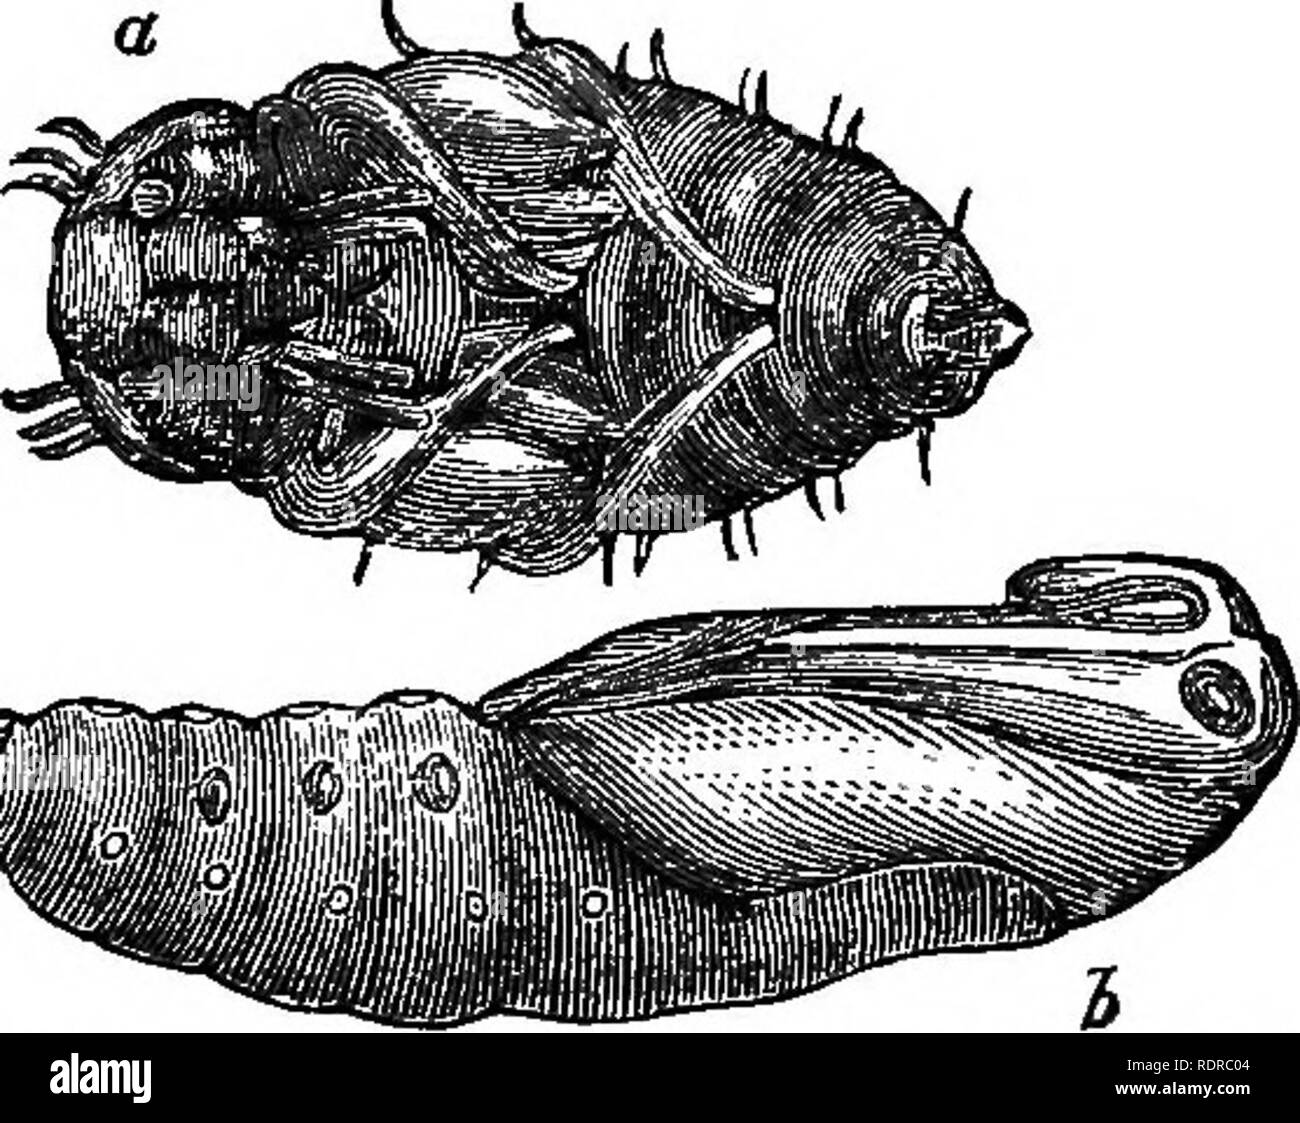 . Natural history. For the use of schools and families. Zoology. 236 NATUEAL HISTOBT. dinary forms and appearance of Pupae (plural of Pupa) are represented in Fig. 185.. Pig. 185.—«, Pupa of a Watei-beetle {Hydro^hilus); 6, Pupa of Sphinx Ligustri, / 404. The different larvae of Insects have the different names of maggot, grub, and caterpUlar, according to their form and appearance. The pupse of Butterflies and Moths vcere formerly called Chrysalids and Aurelias, be- cause the coverings of some of them have spots of a golden hue. The term Chrysalis is often used at the present day as synonymou Stock Photo